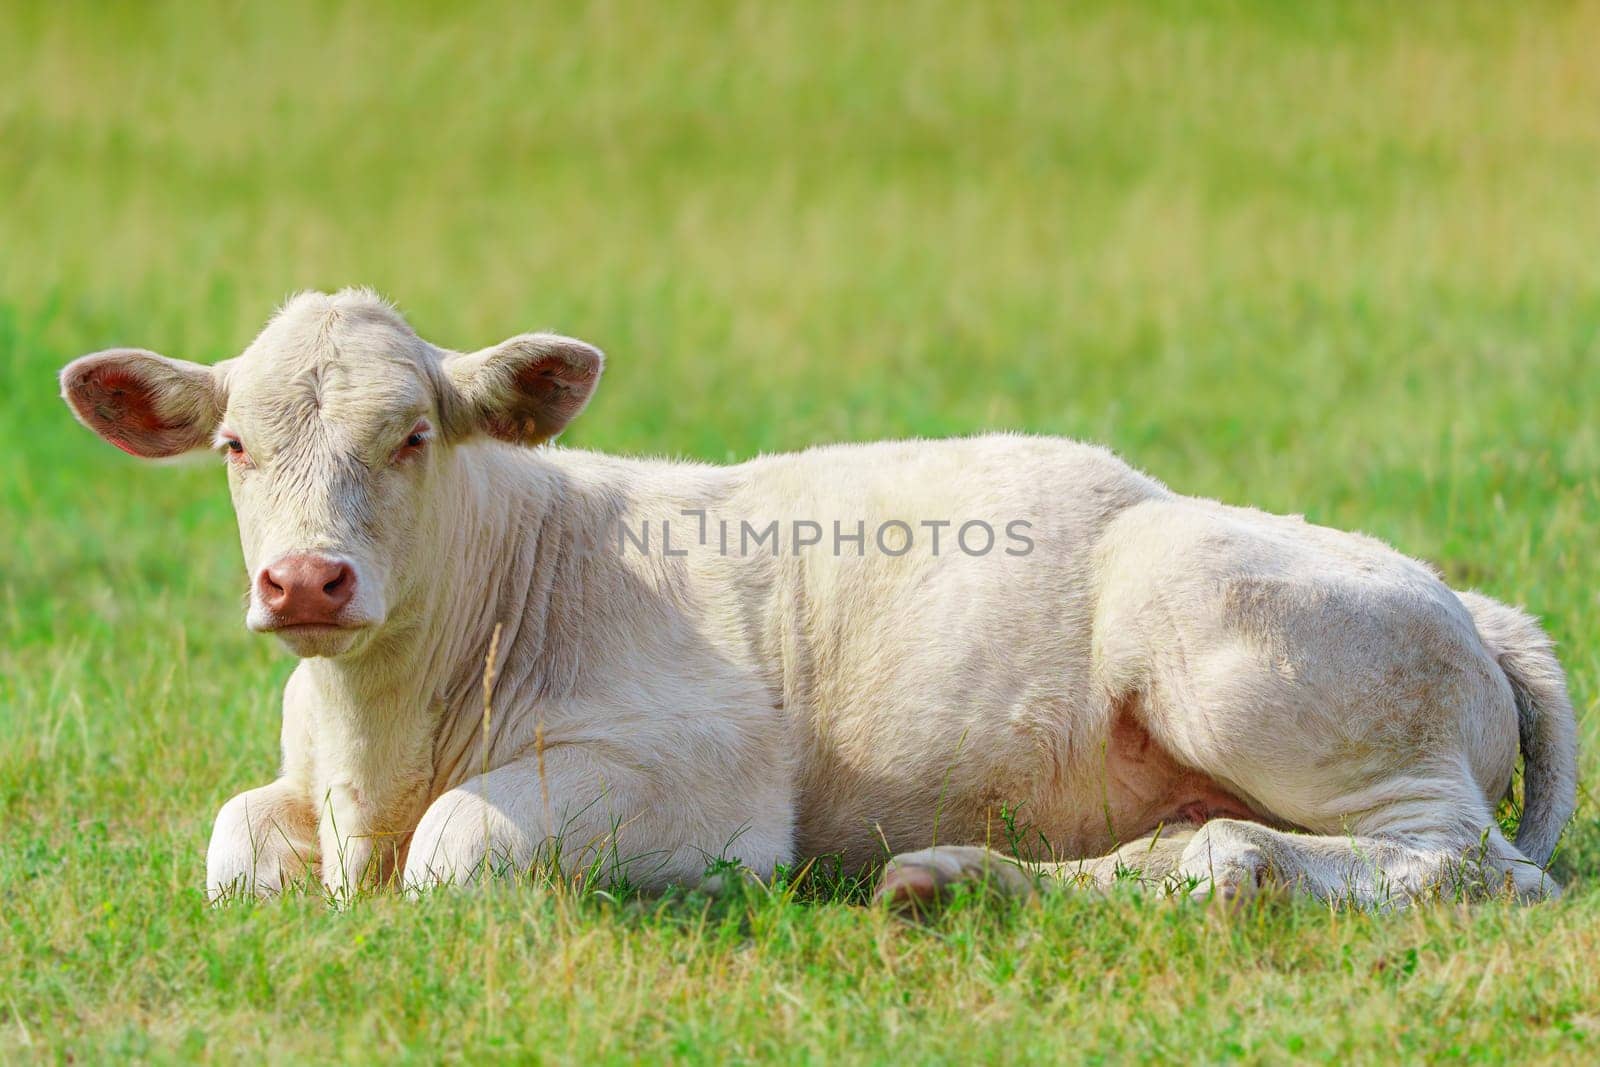 Enjoying the warmth of a sunny summer day, a group of white French meat cows peacefully relax and graze on the vibrant green pasture in the serene countryside